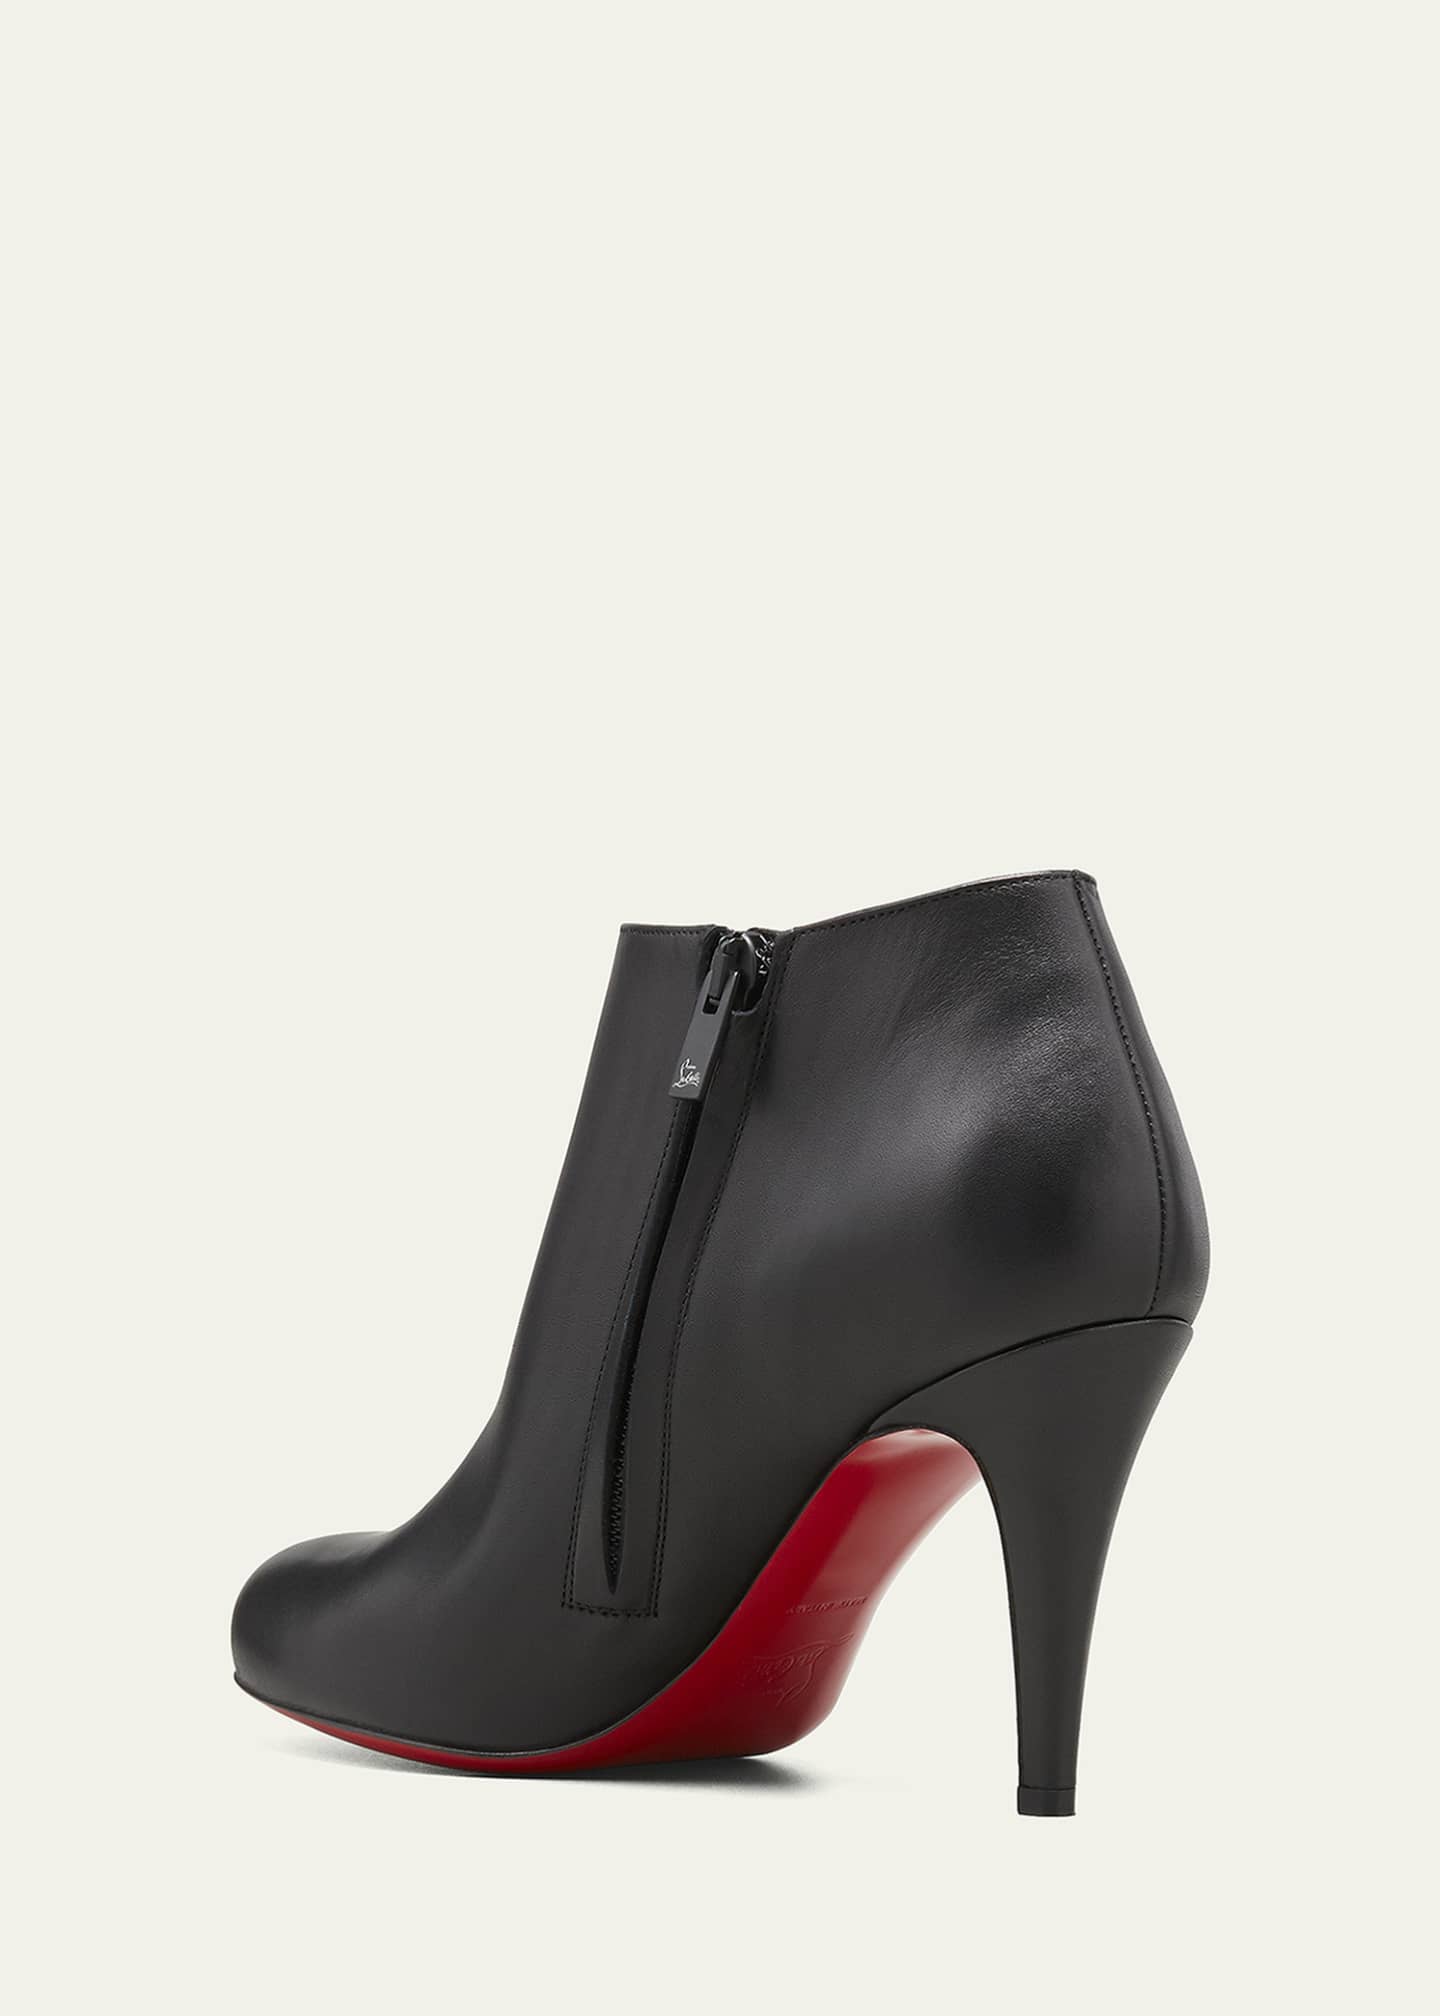 svimmel Sociale Studier jeans Christian Louboutin Belle Leather Red-Sole Ankle Boots - Bergdorf Goodman